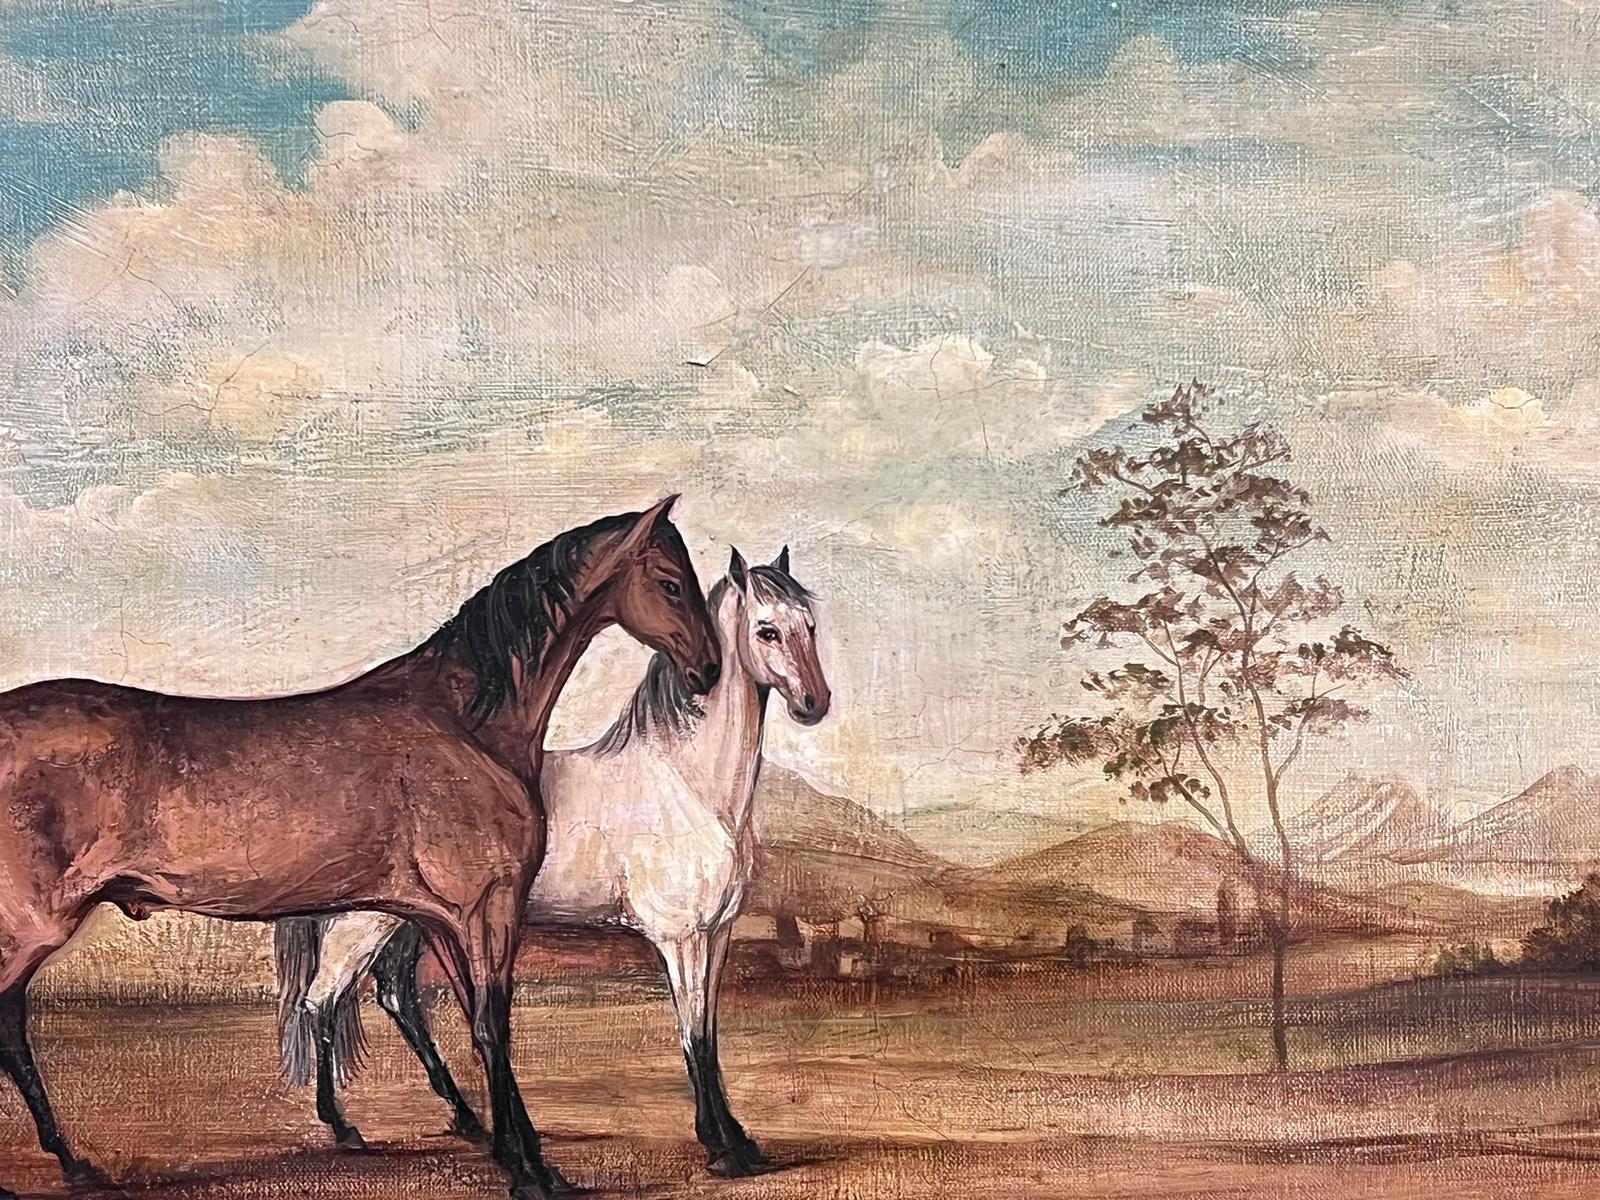 Horses Standing in Landscape
French School, 20th century
oil on canvas, framed
framed: 25 x 34 inches
canvas: 19.5 x 30 inches
provenance: private collection, France
condition: very good and sound condition